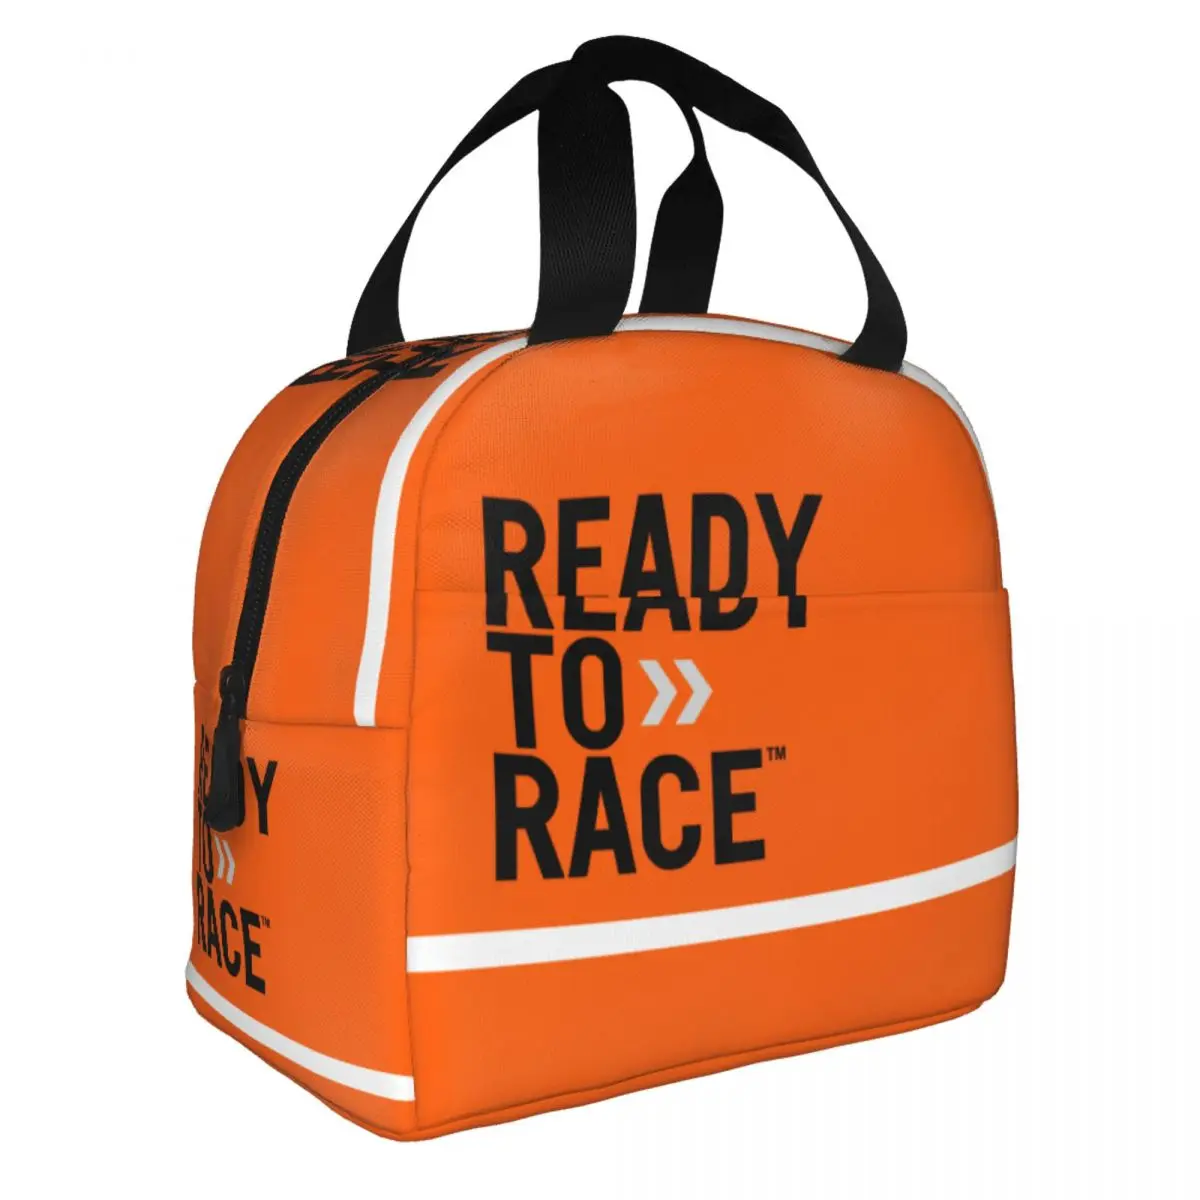 

Ready To Race Lunch Bag Leakproof Motorcycle Rider Racing Insulated Thermal Cooler Lunch Box for Women Camping Travel Food Bags